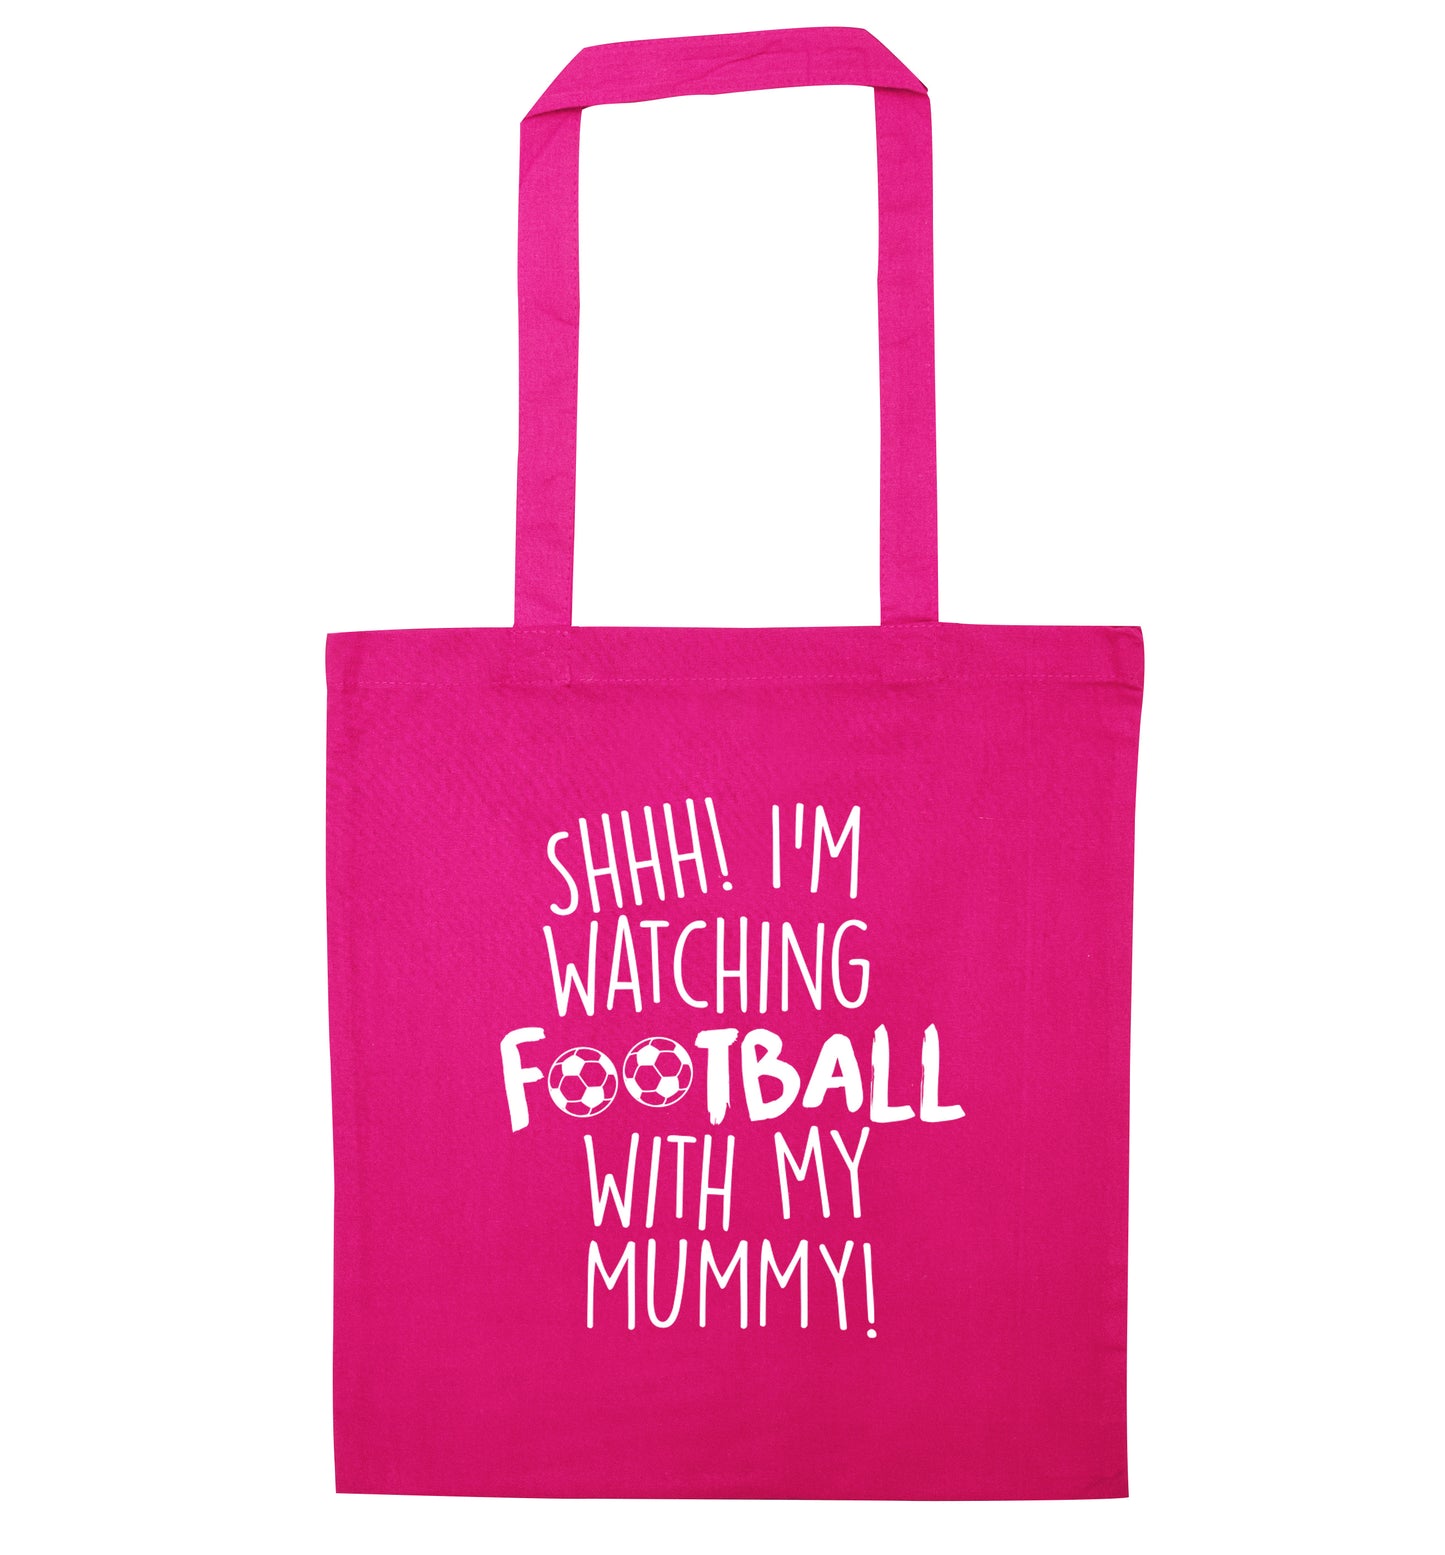 Shhh I'm watching football with my mummy pink tote bag